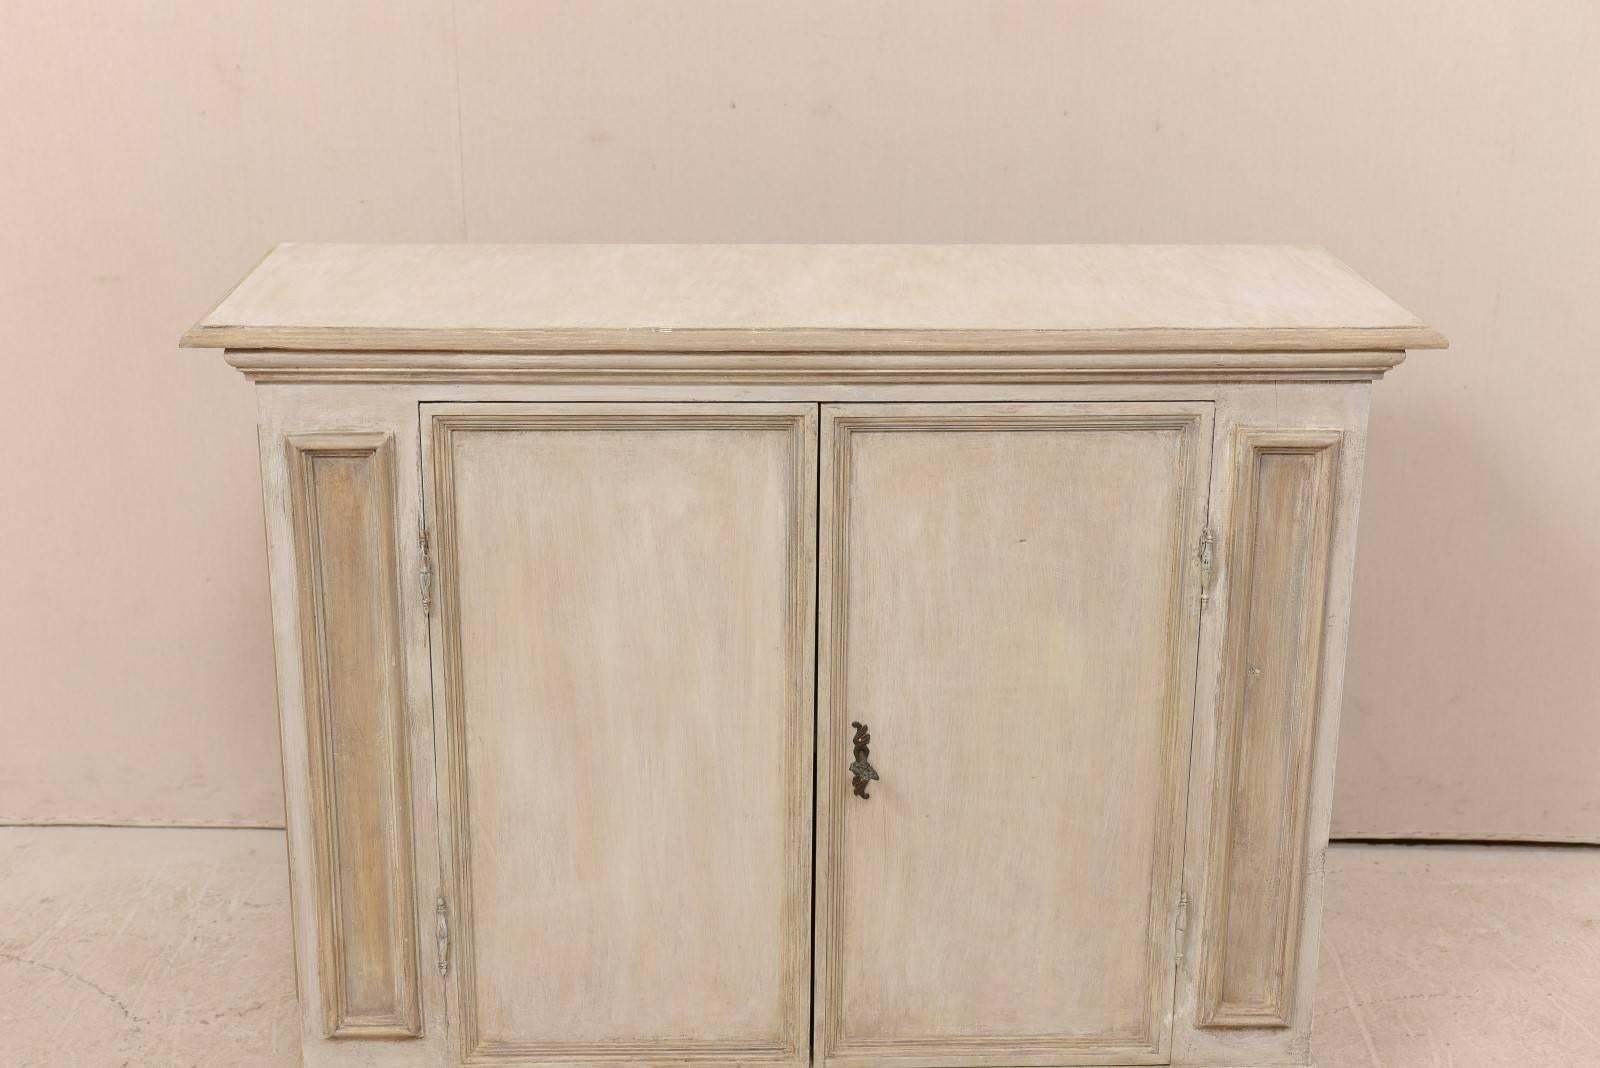 Carved Italian Mid-20th Century Painted Wood Two-Door Cabinet in Neutral Light Beige